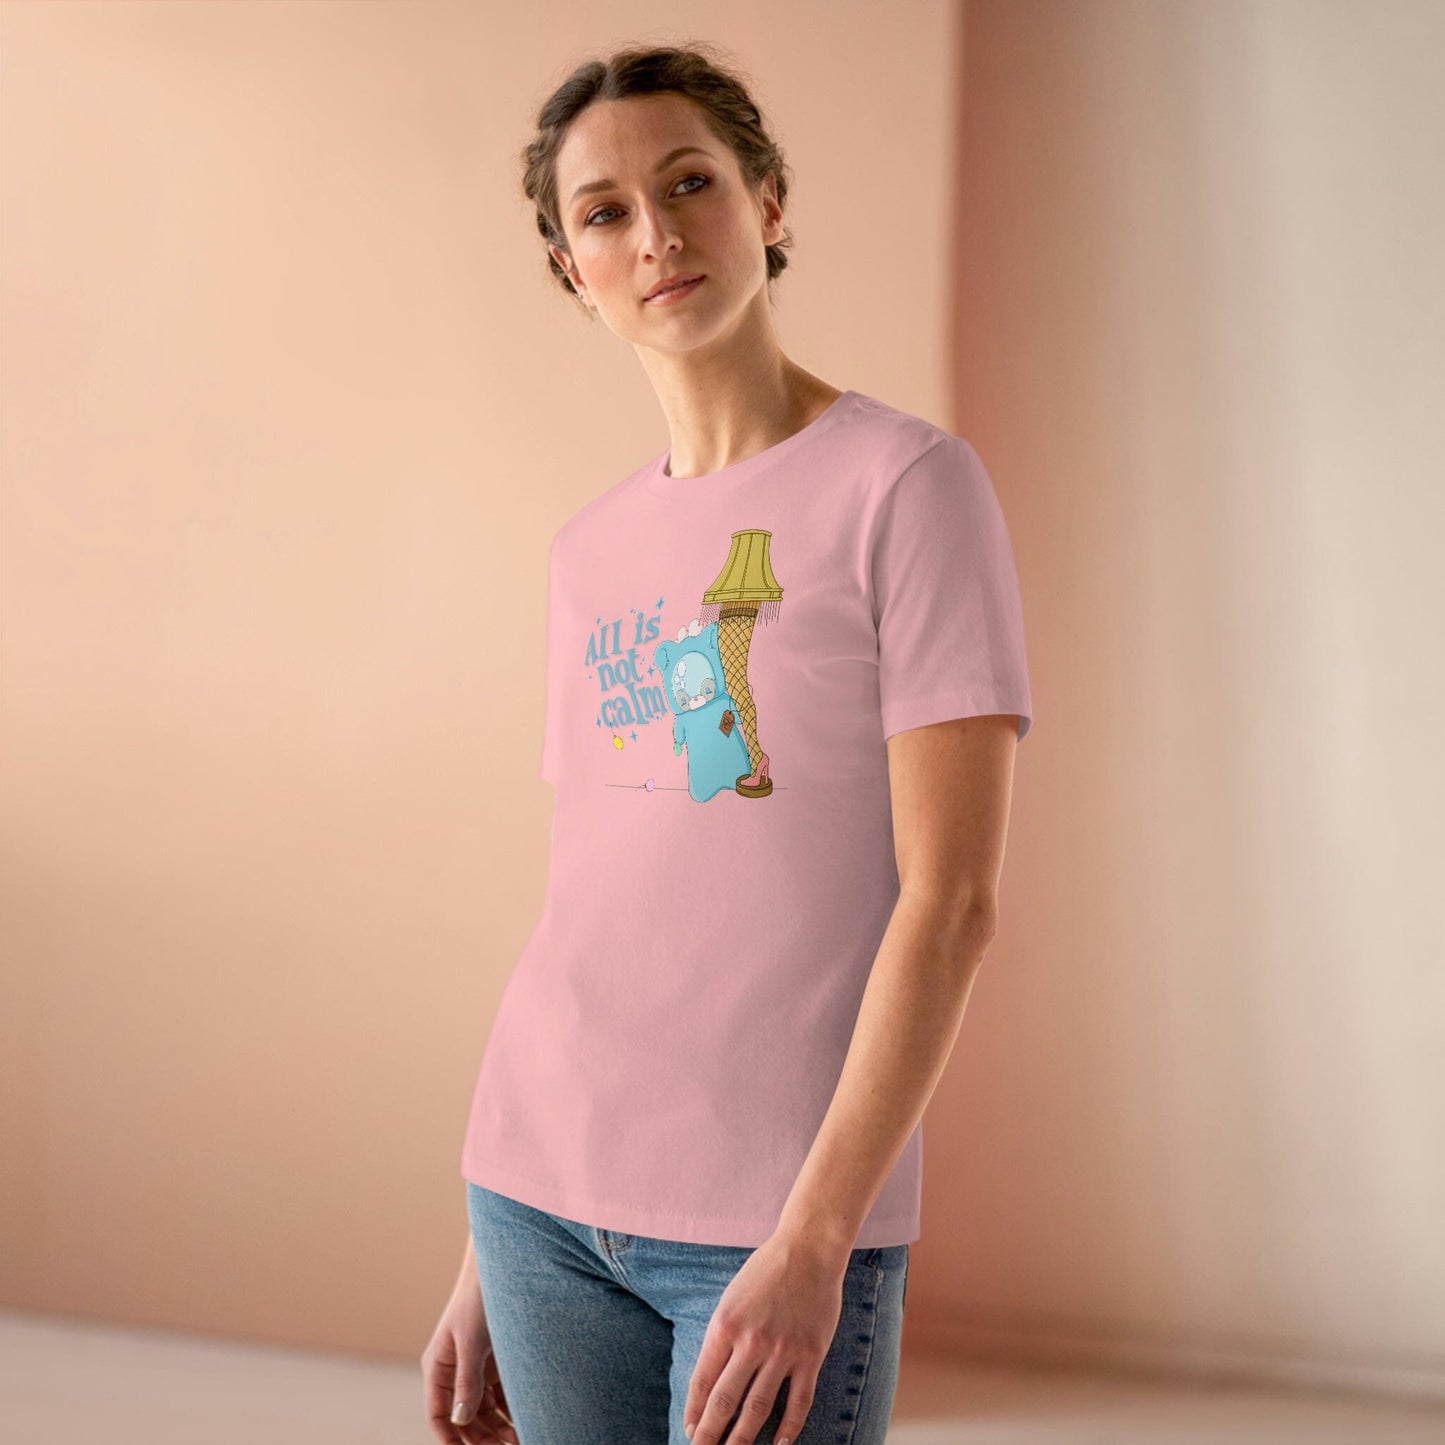 The Tag Katie Women's Tee